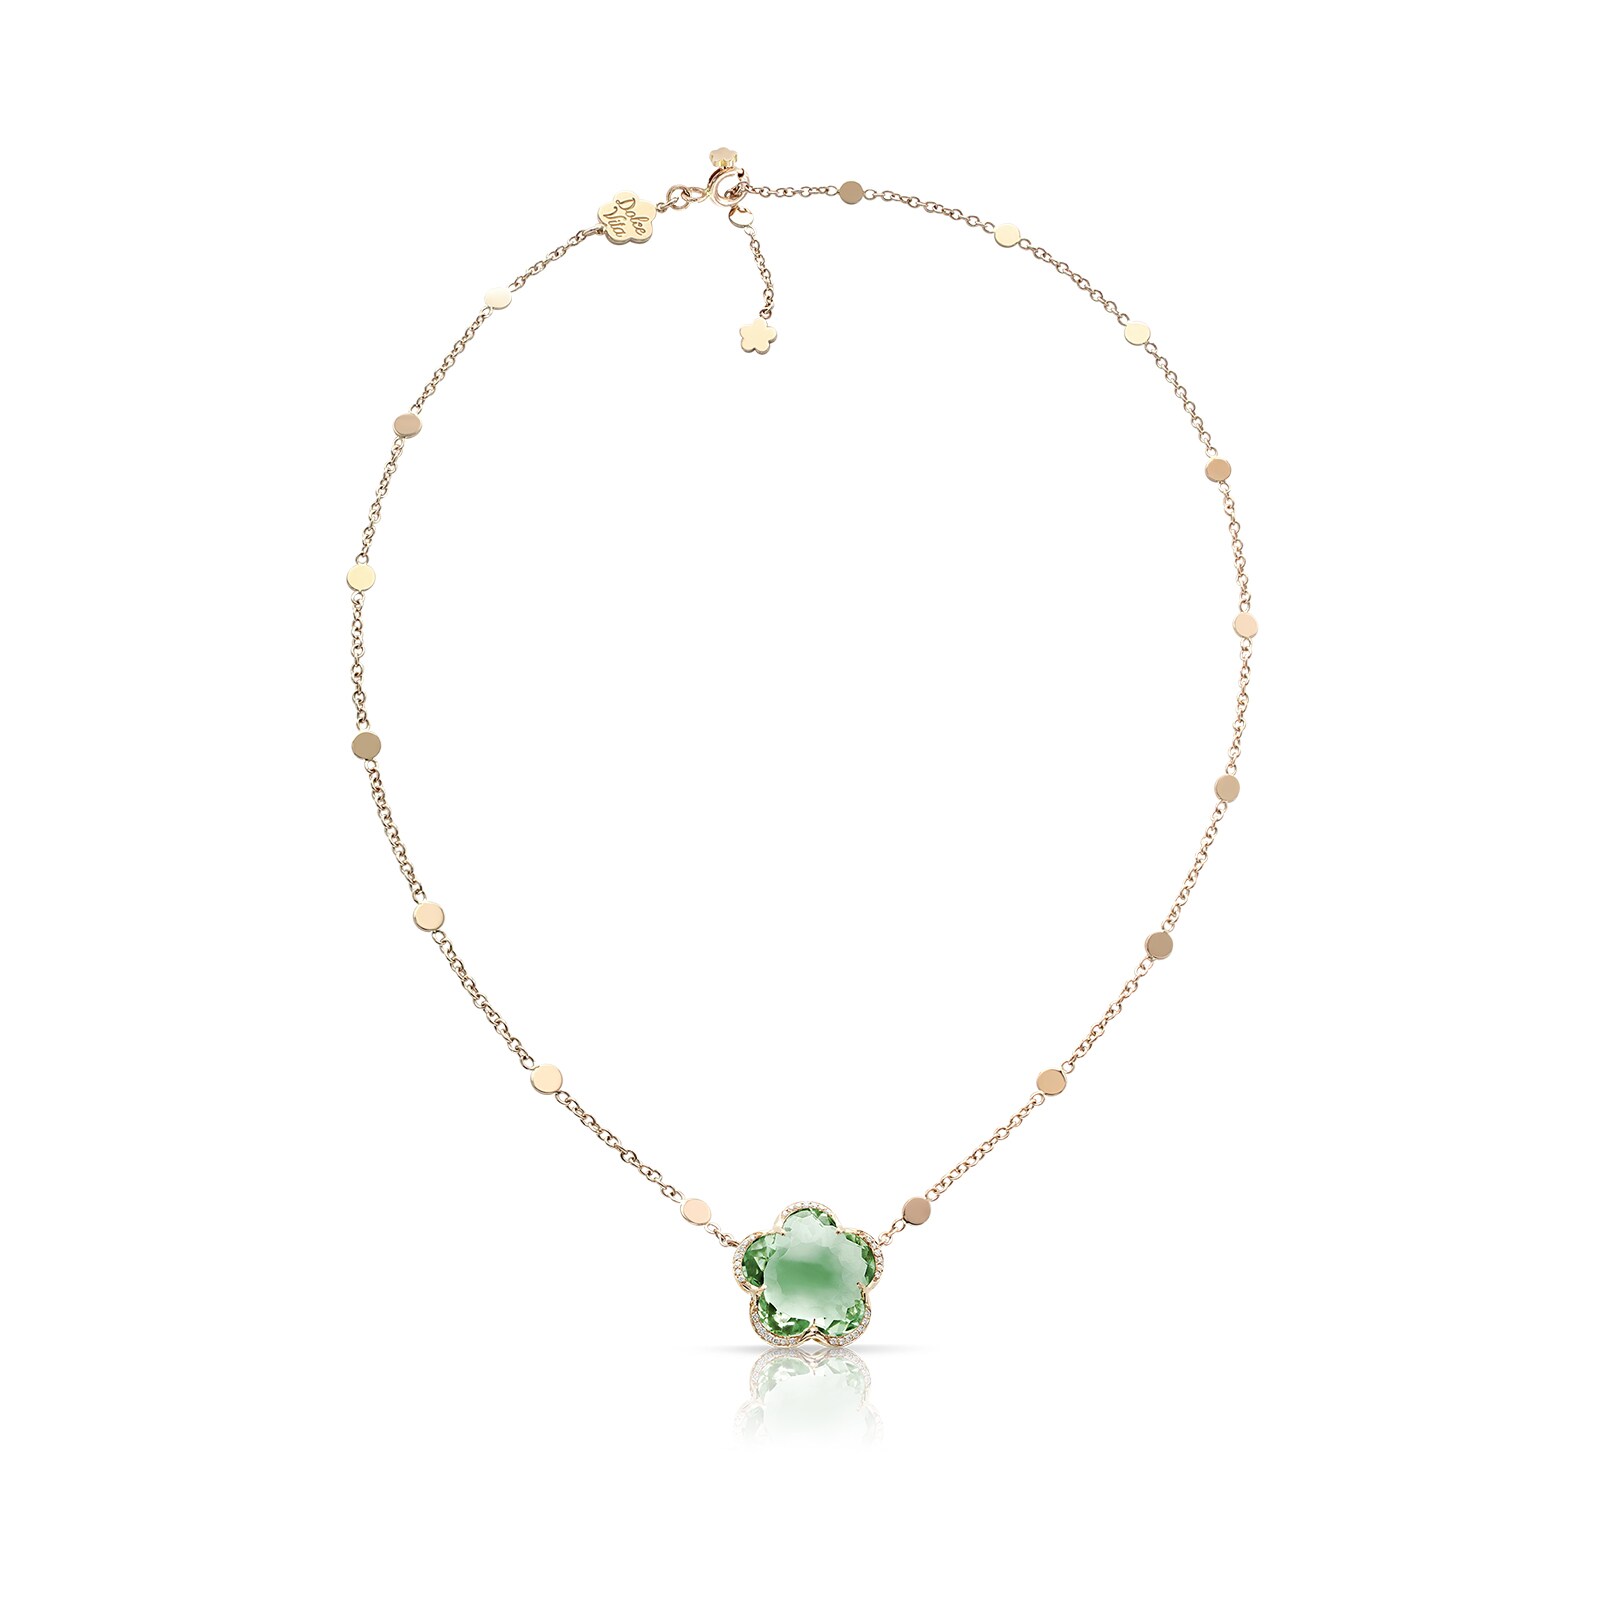 Bon Ton Dolce Vita Necklace in 18ct Rose Gold with Prasiolite and Diamonds